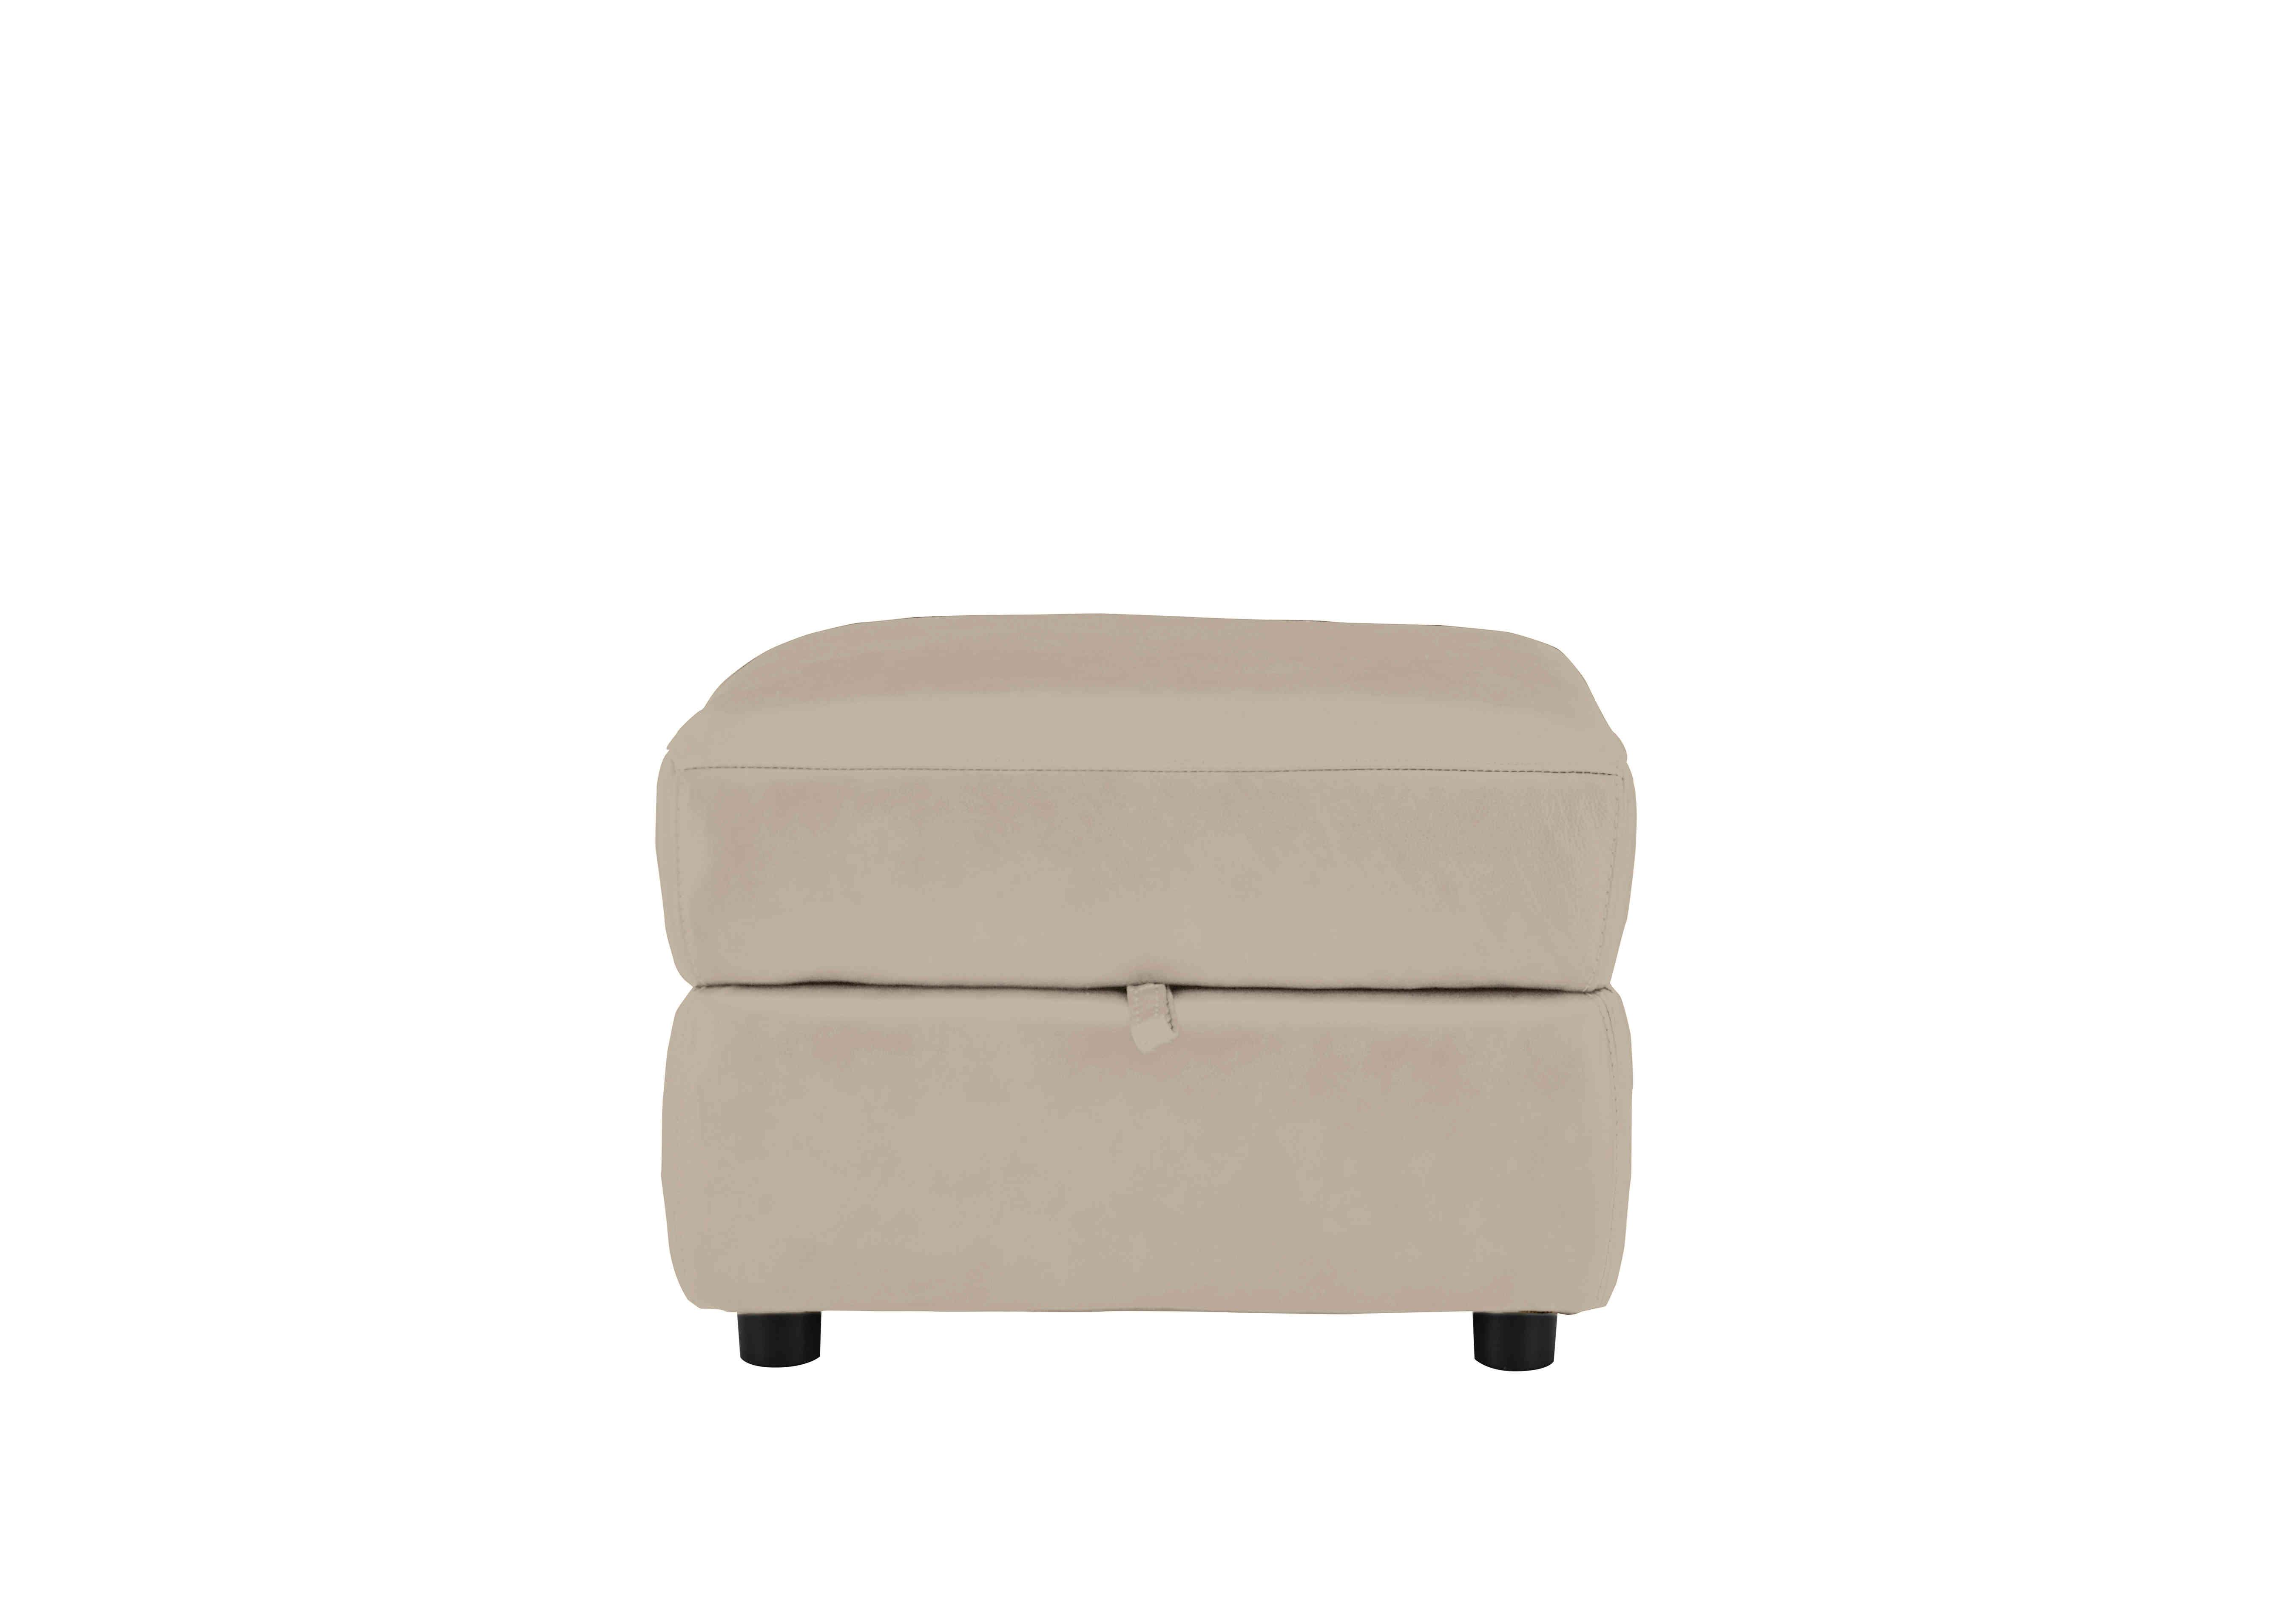 Relax Station Revive Leather Storage Footstool in Bv-039c Pebble on Furniture Village